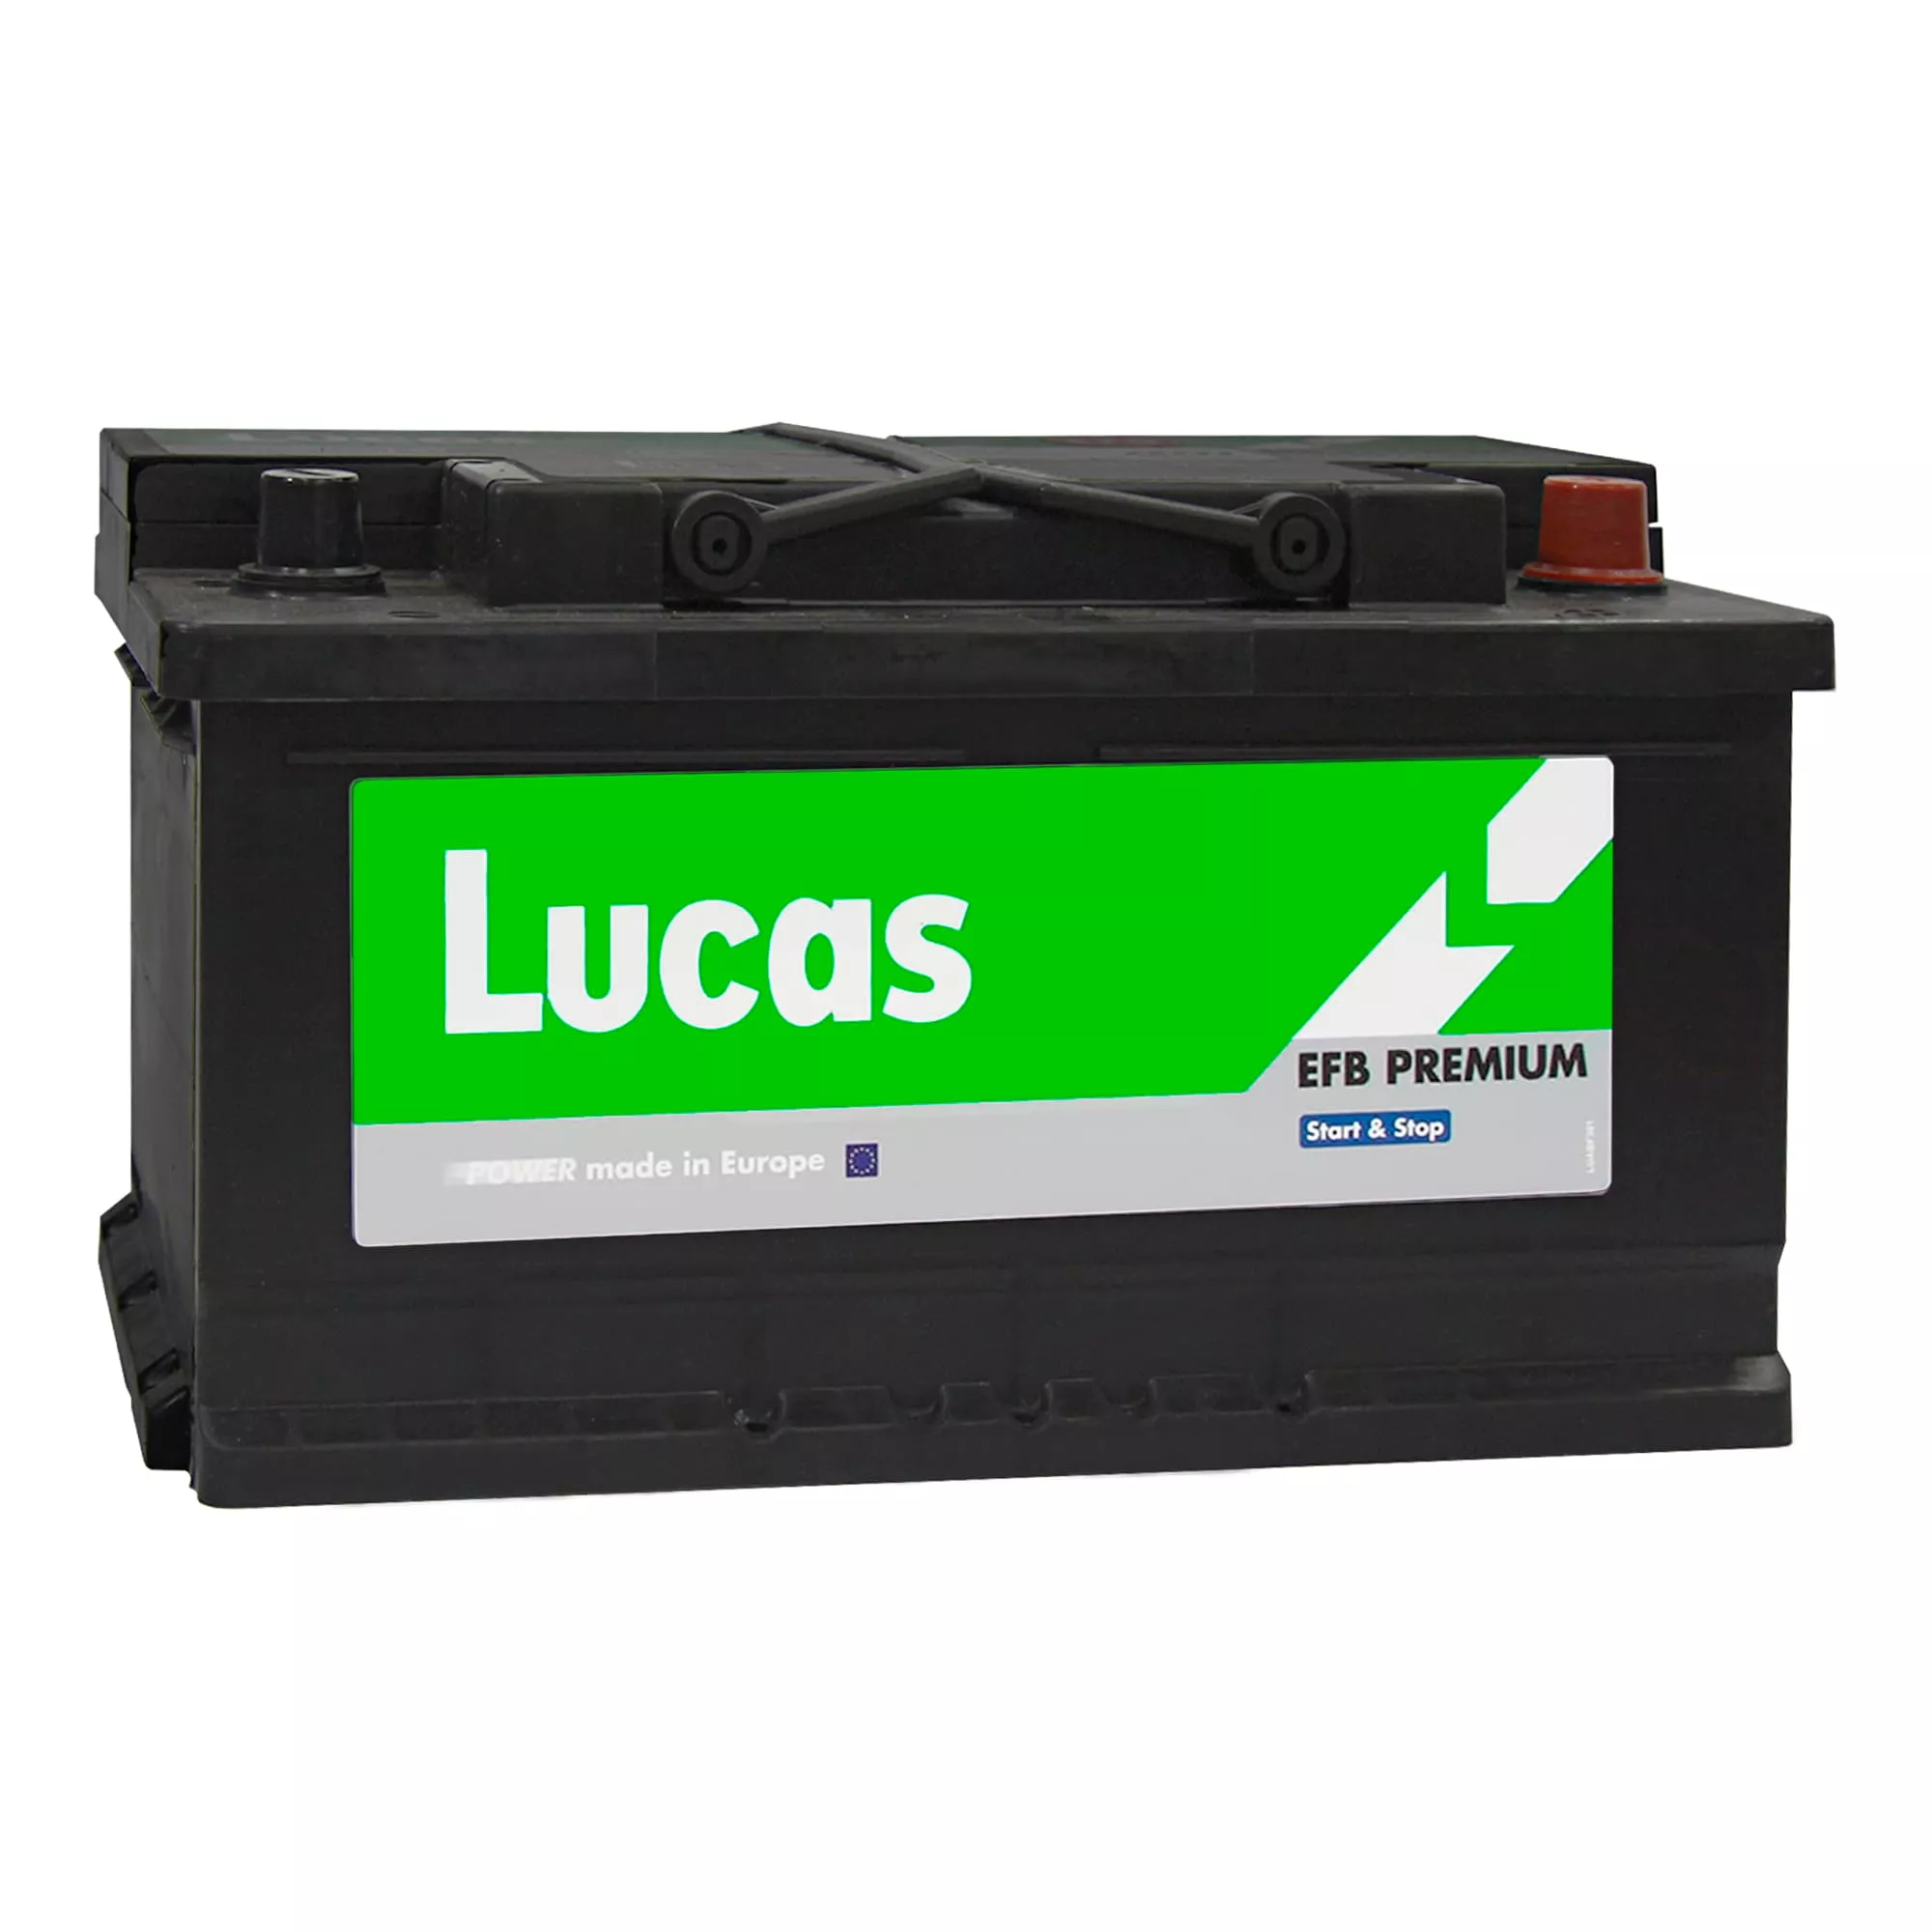 Аккумулятор Lucas (Batteries manufactured by Exide in Spain) 6CT-75 АзЕ EFB Start-Stop (LBEFB004A)